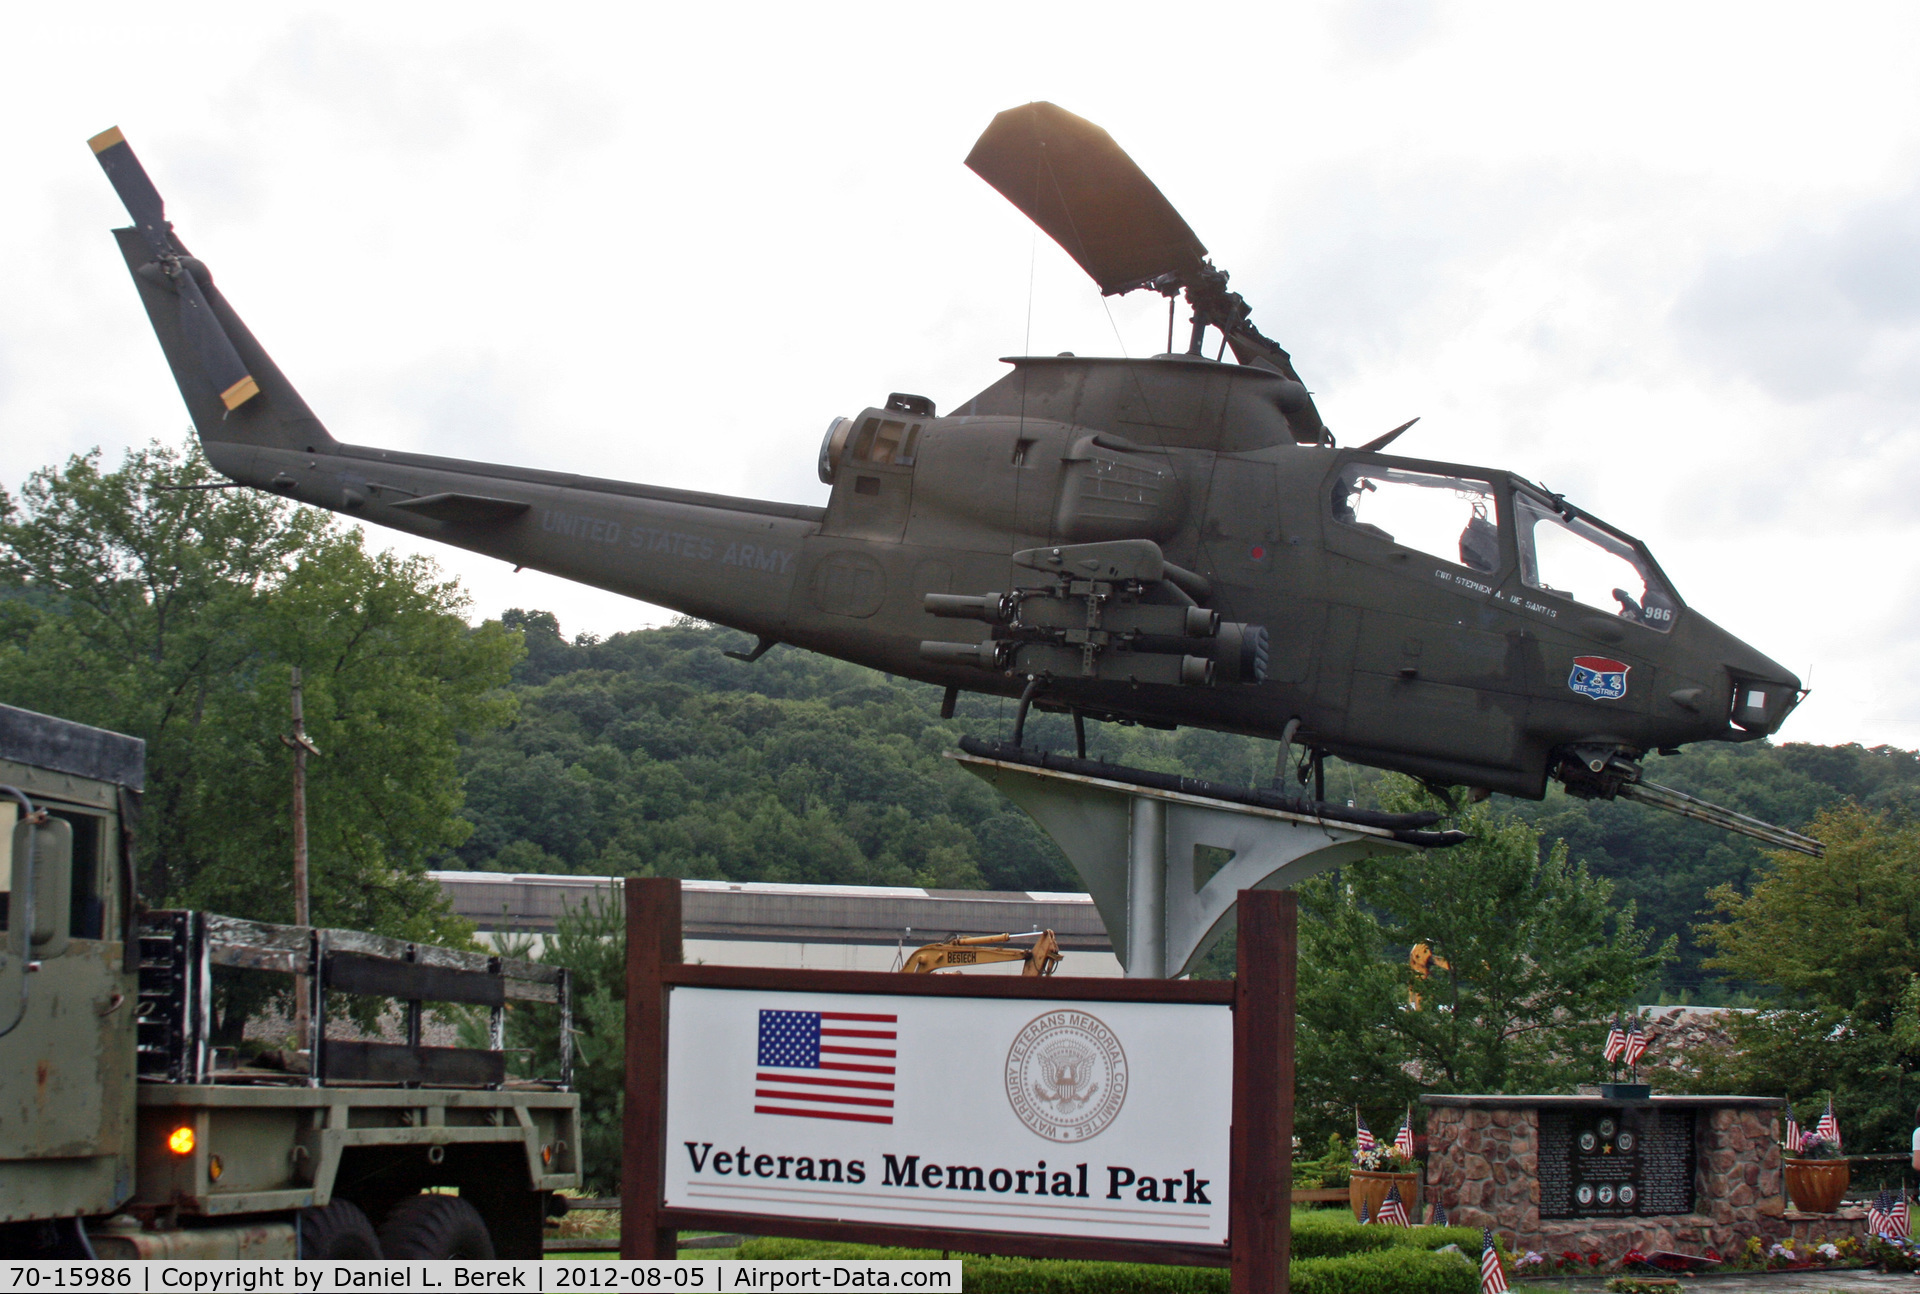 70-15986, 1970 Bell AH-1G Cobra C/N 20930, This Huey is on display at Veterans Park, Thomaston Ave., in the northwestern section of town.  The park includes memorials and other Army vehicles.